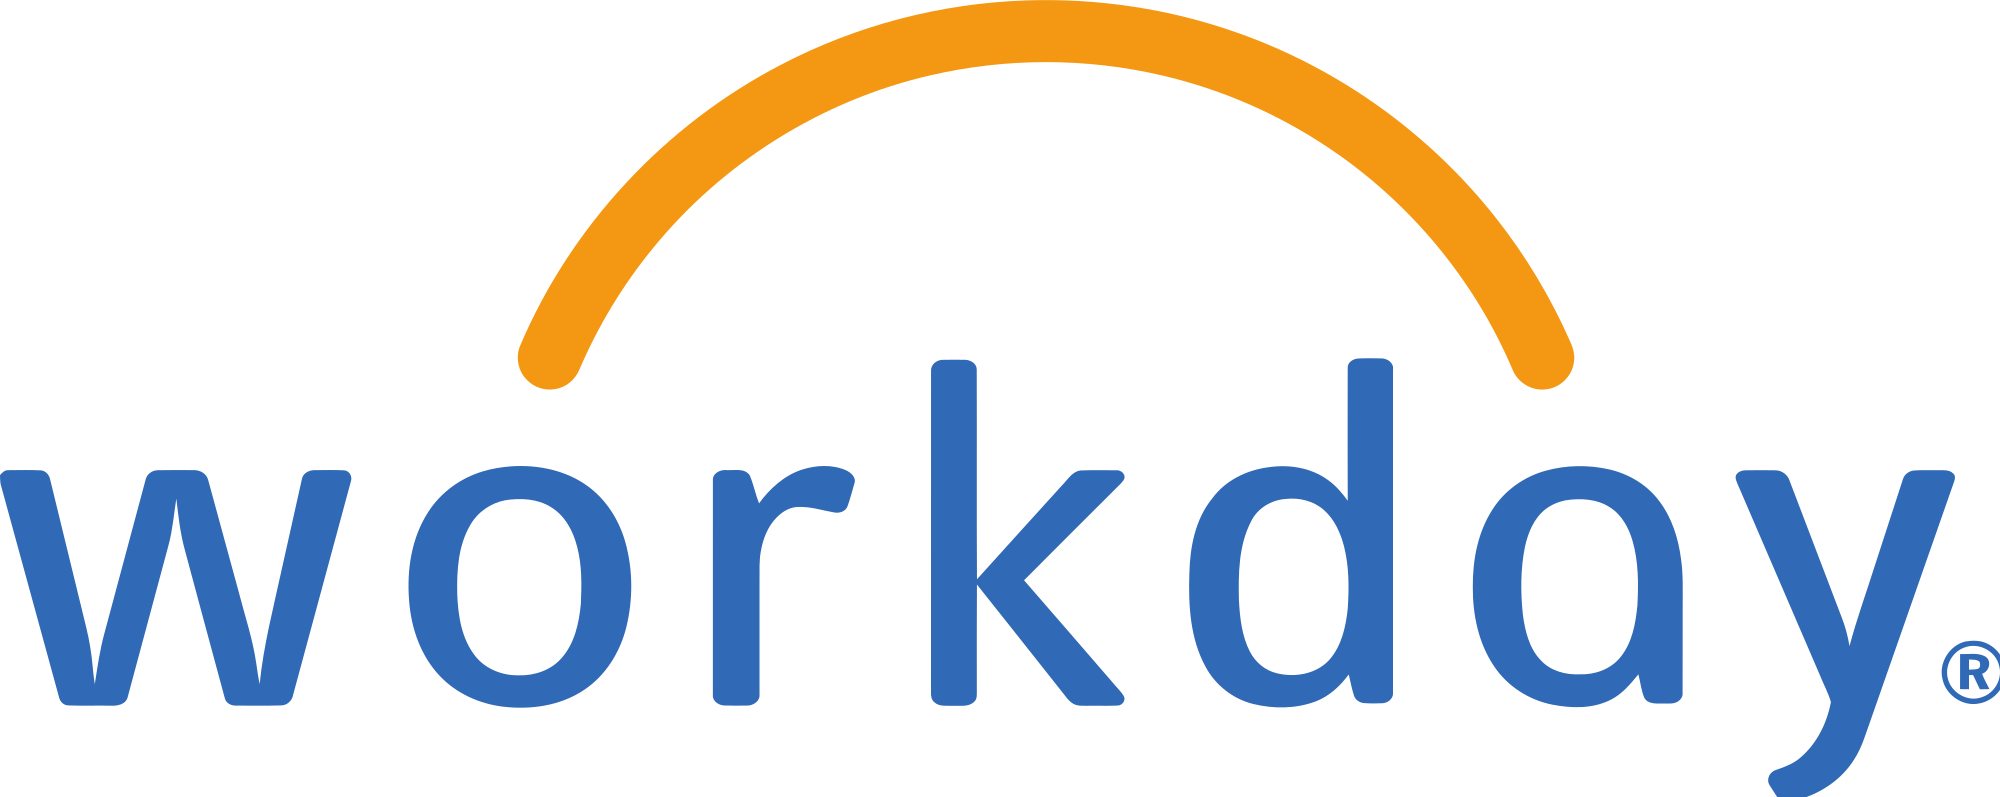 Workday Logo - File:Workday logo.svg - Wikimedia Commons